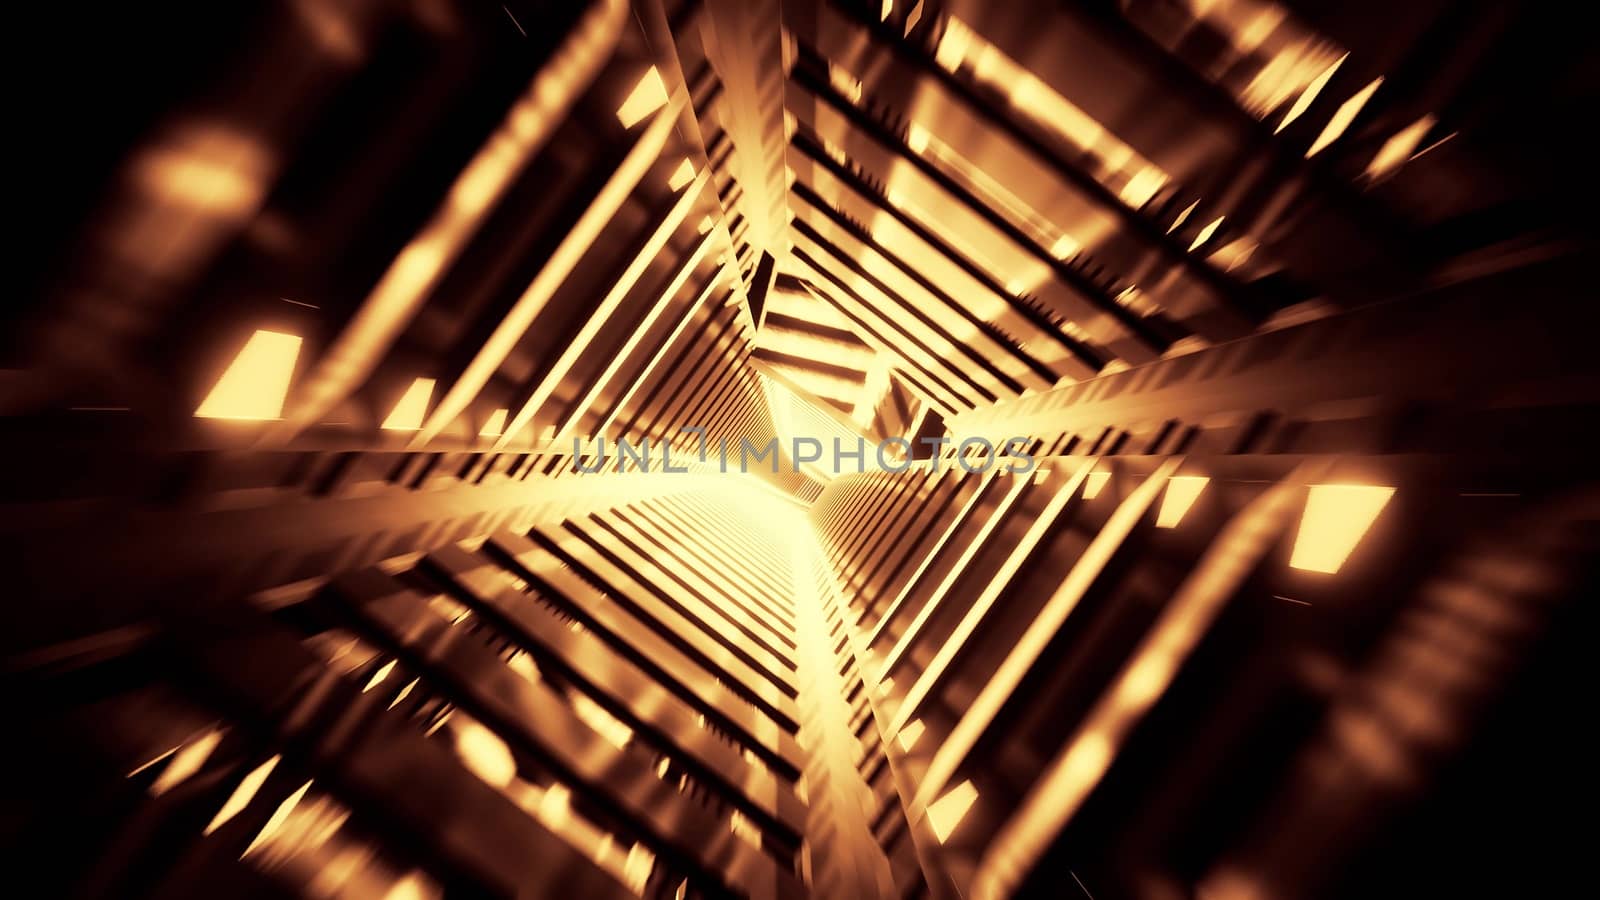 abwtract glowing futuristic scifi subway tunnel corridor 3d rendering wallpaper background design, modern abstract sci-fi art with glowing lights 3d illustration